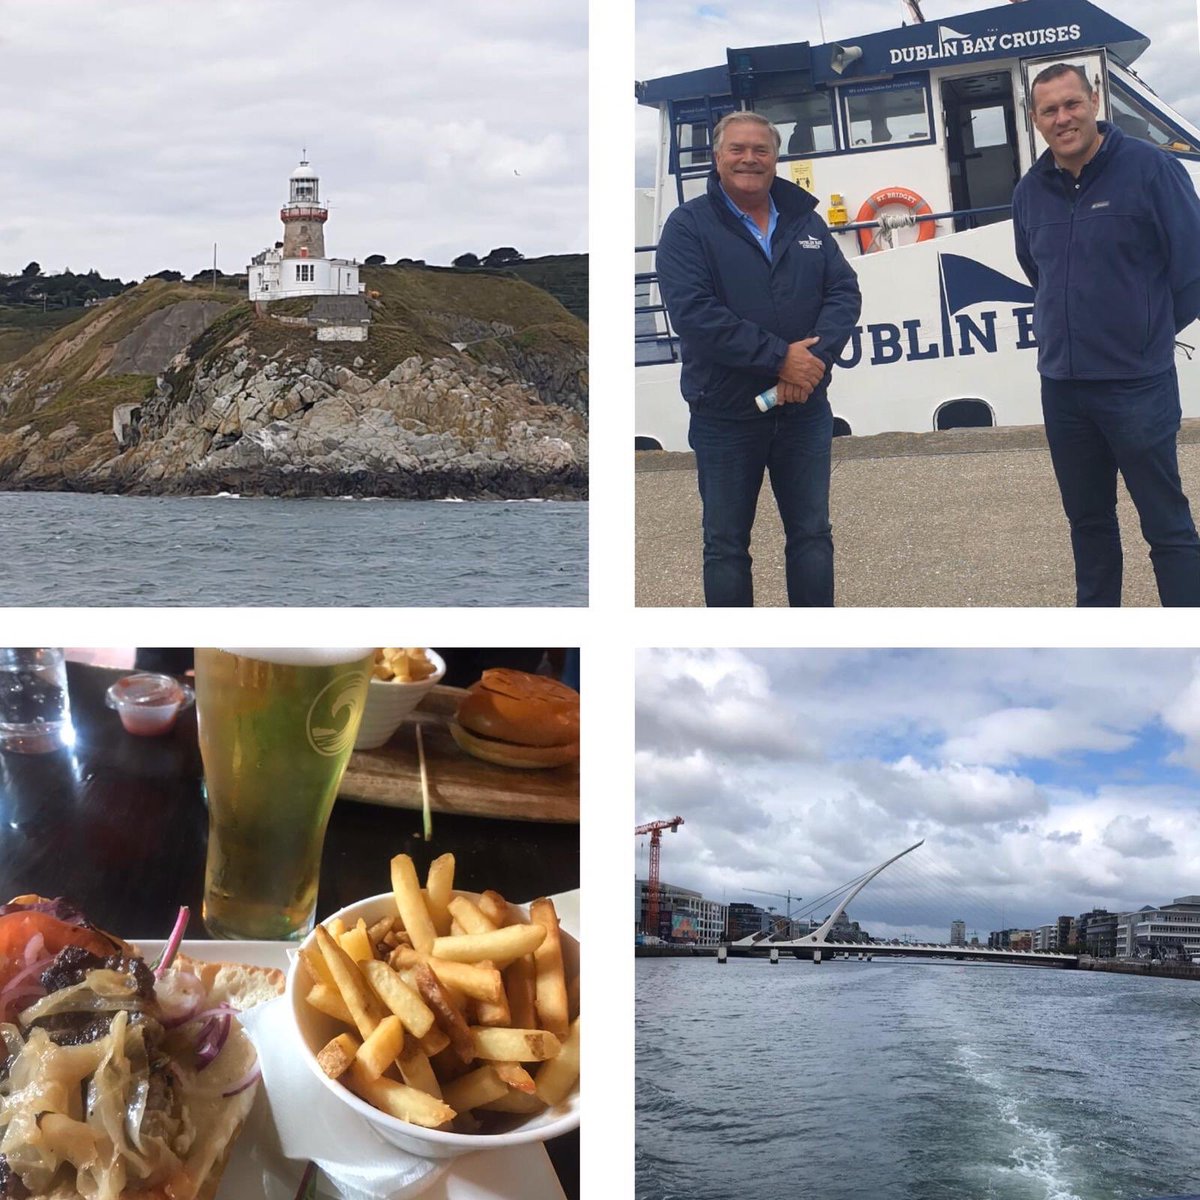 A great family day out on our doorstep. Super way to see Dublin in a different way. Thanks to all the crew @DublinBayCruise Finished off with nice meal in the Bloody Stream in Howth👍#supportlocalBusiness #localtourism #staycation